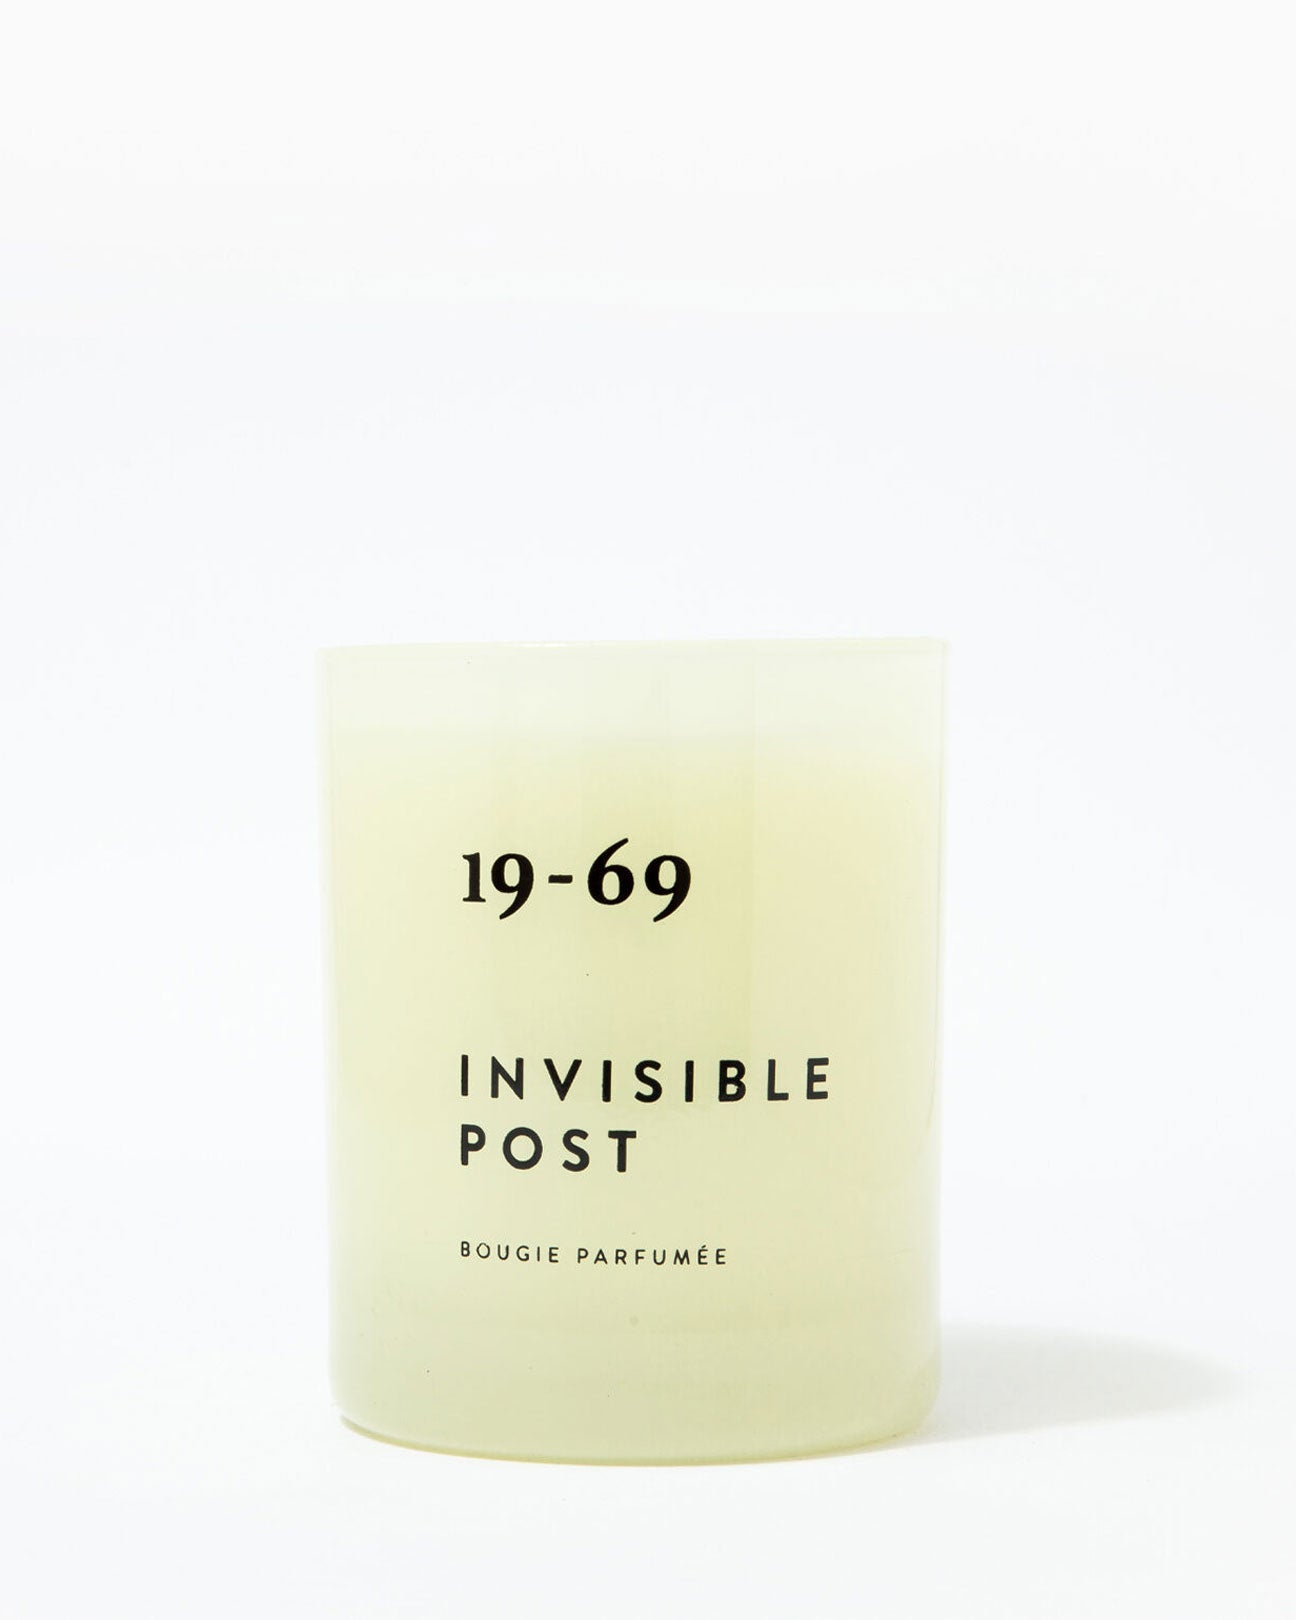 19-69 Candle in Invisible Post available at Lahn.shop